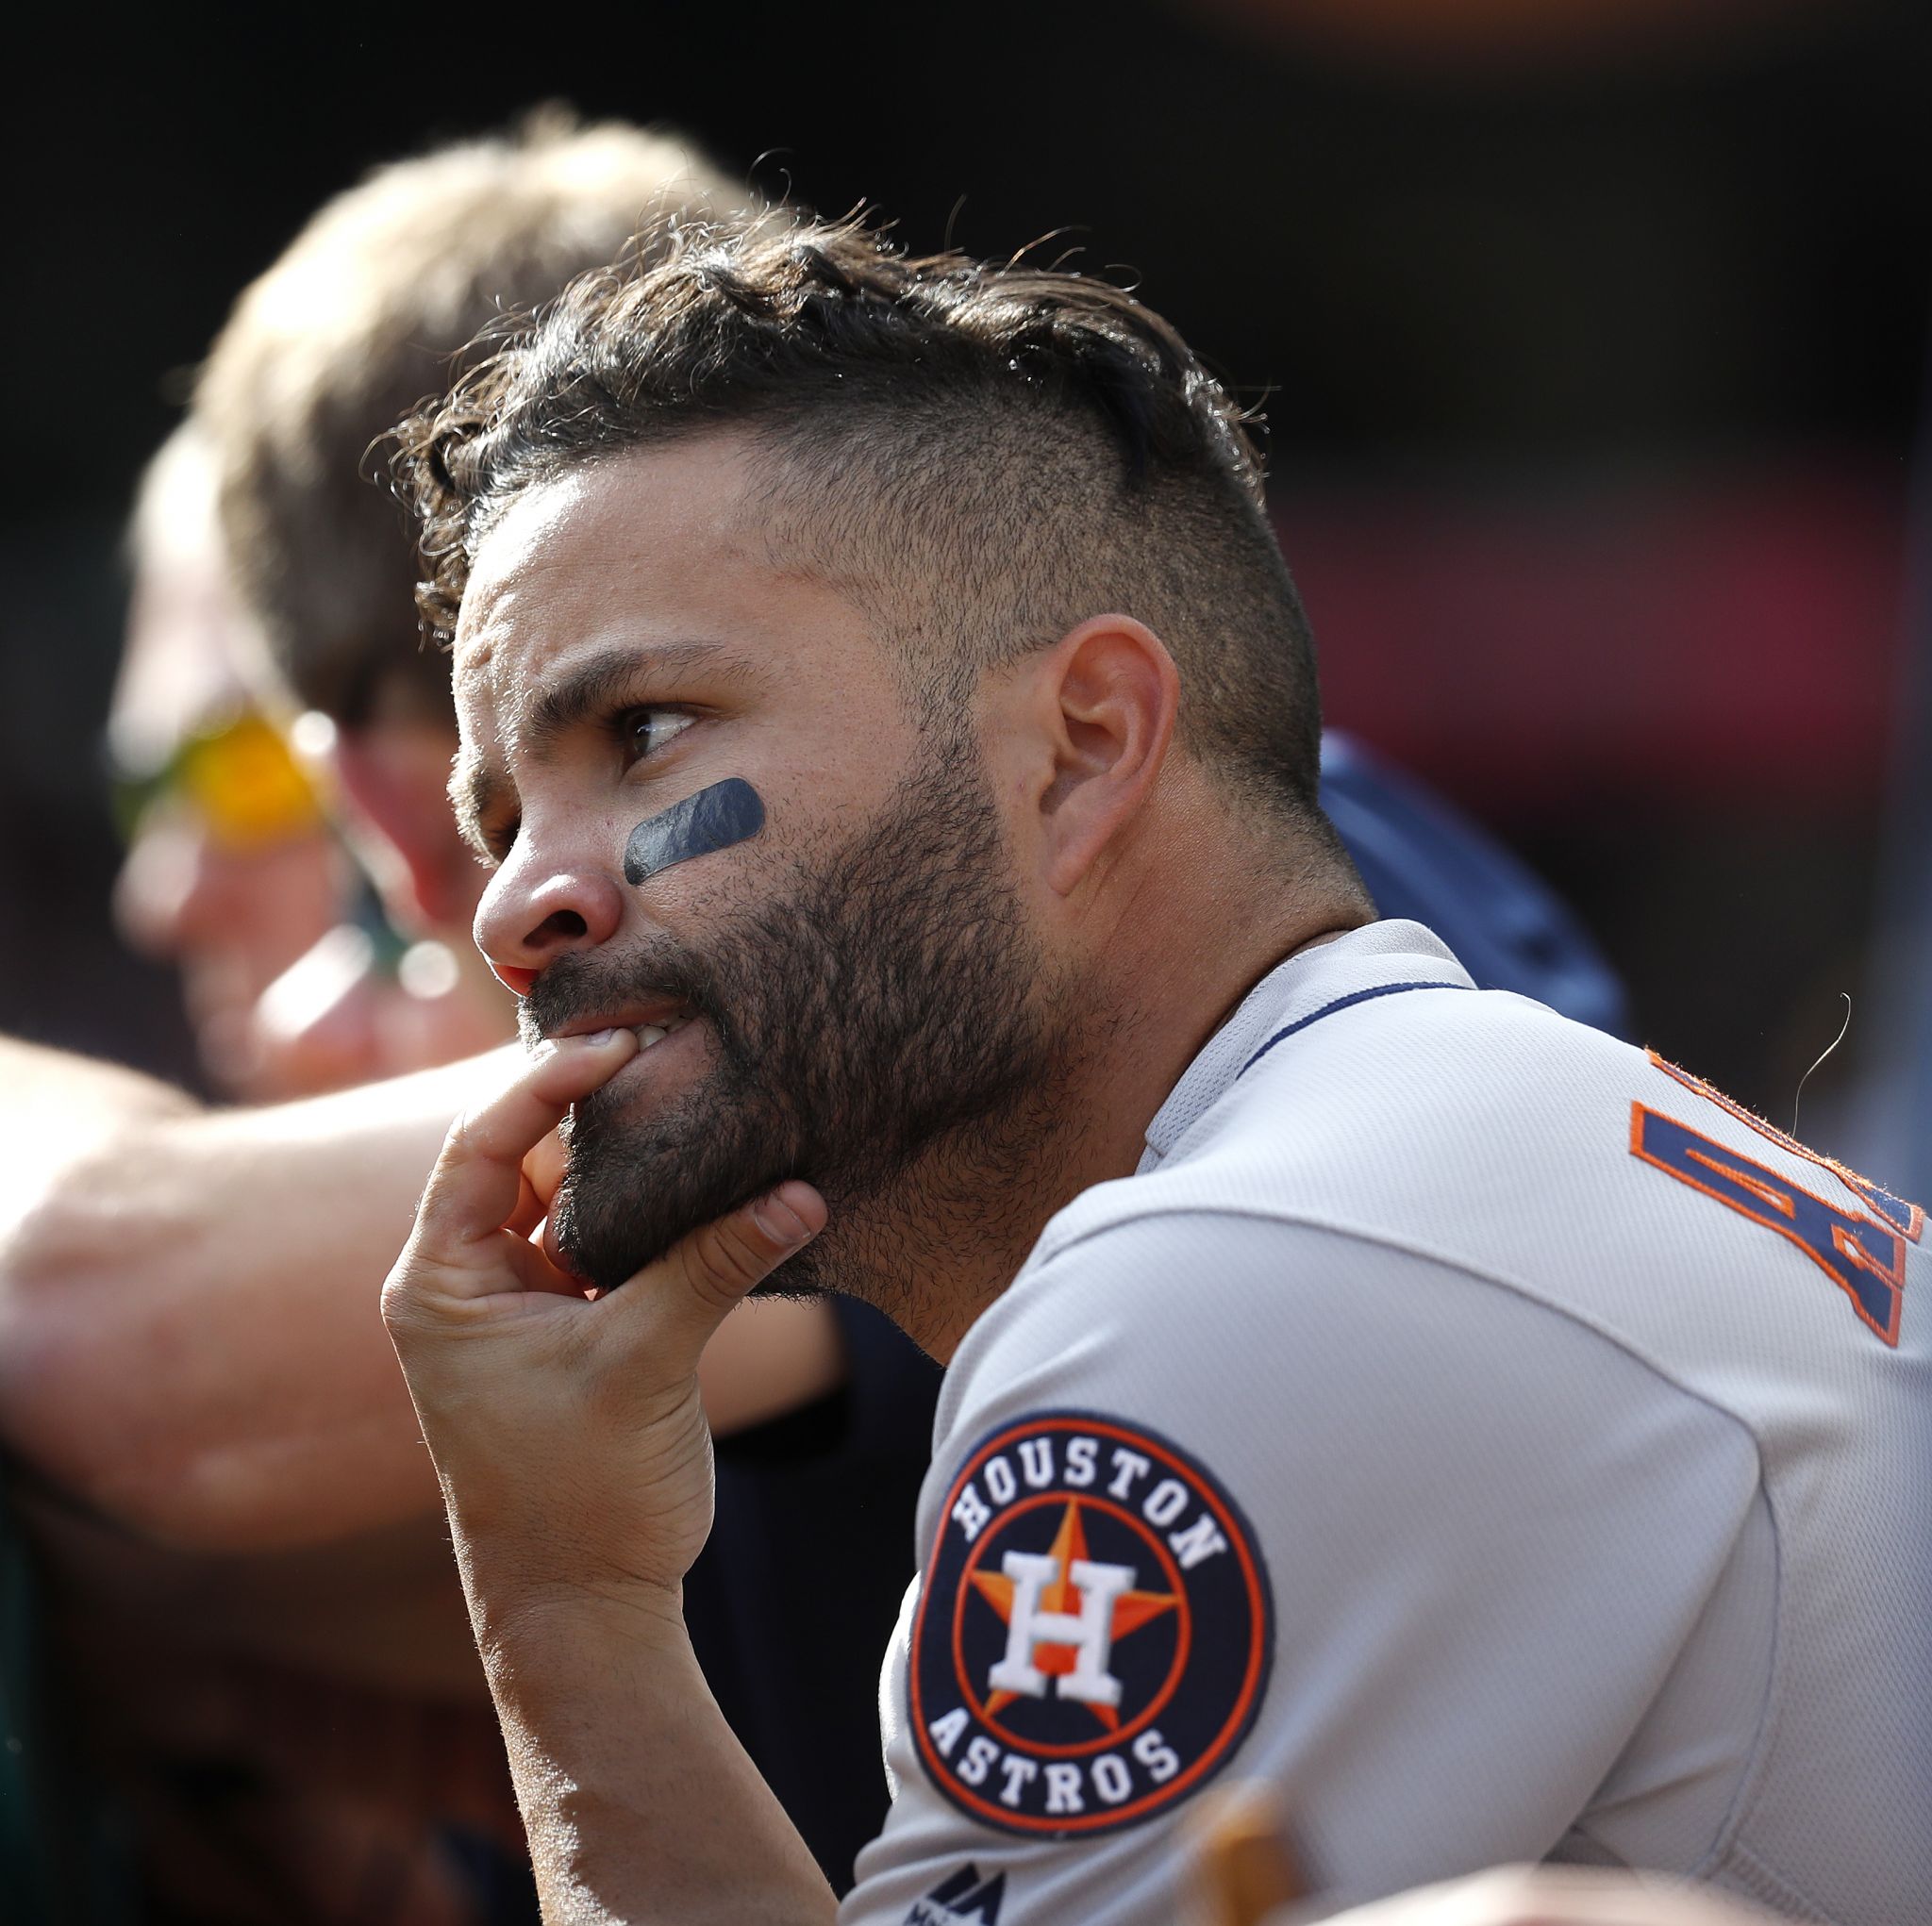 Check out Dallas Keuchel's cool new World Series tattoo